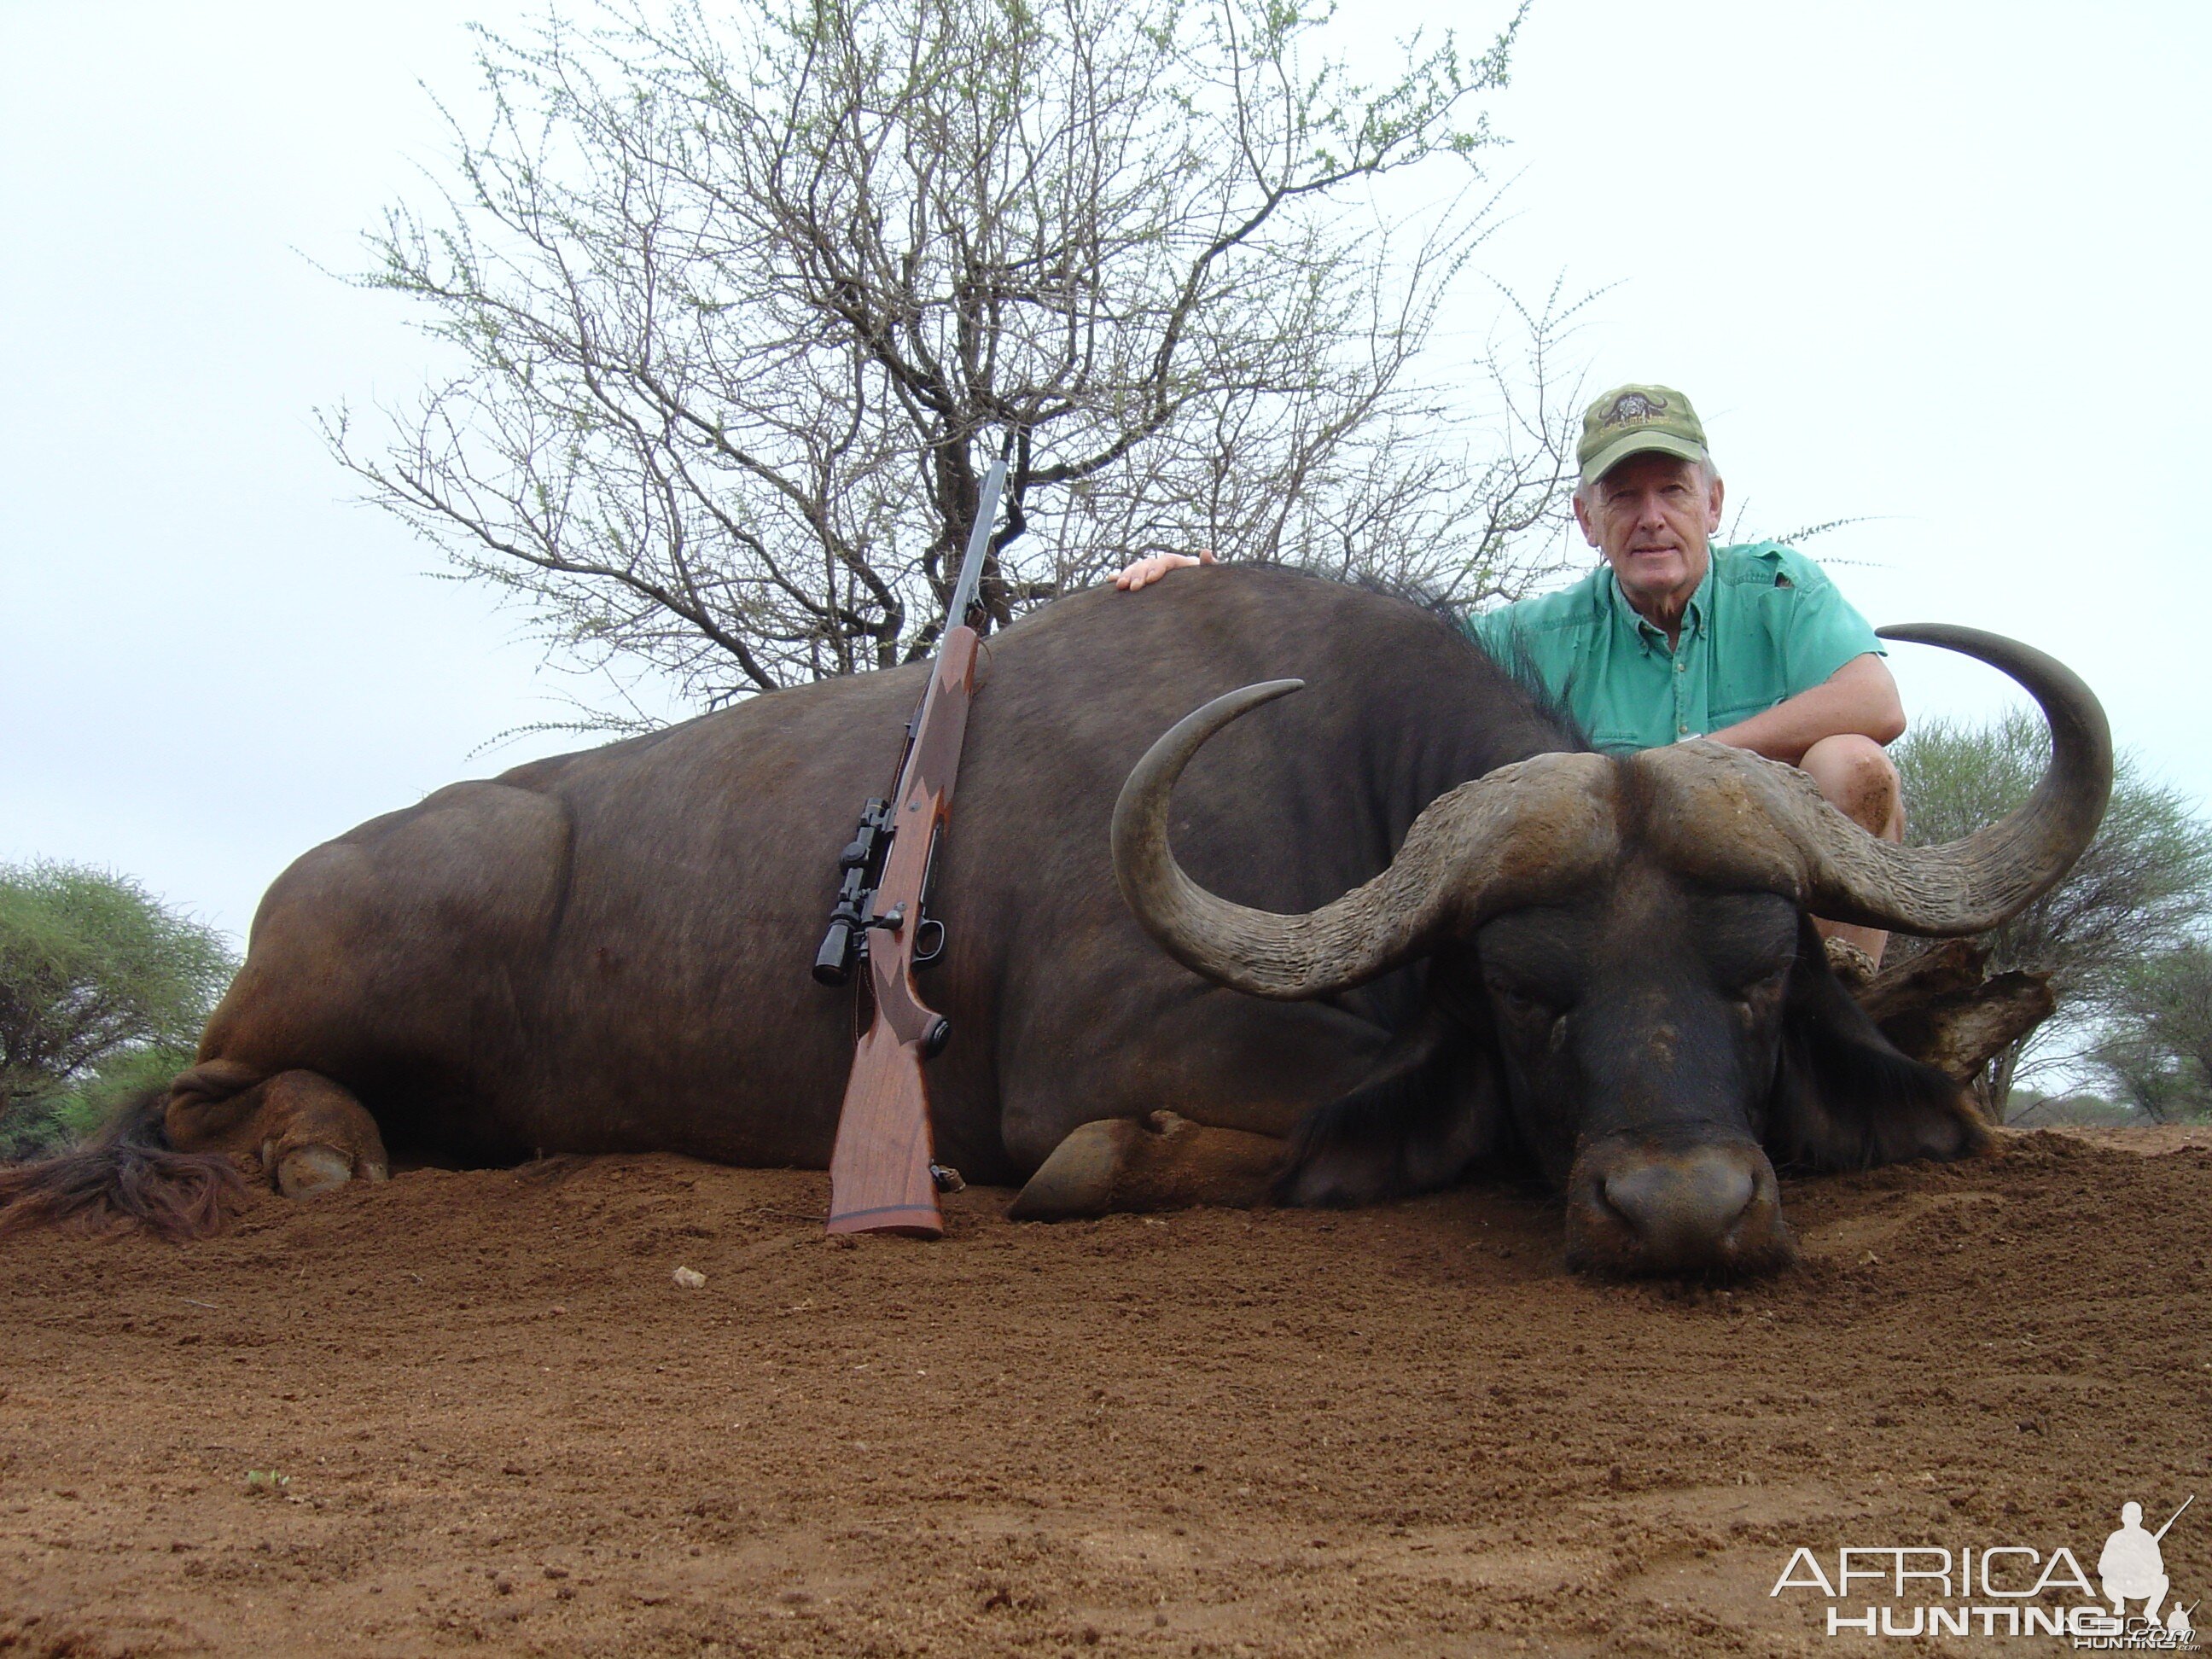 Cape Buffalo hunted in South Africa